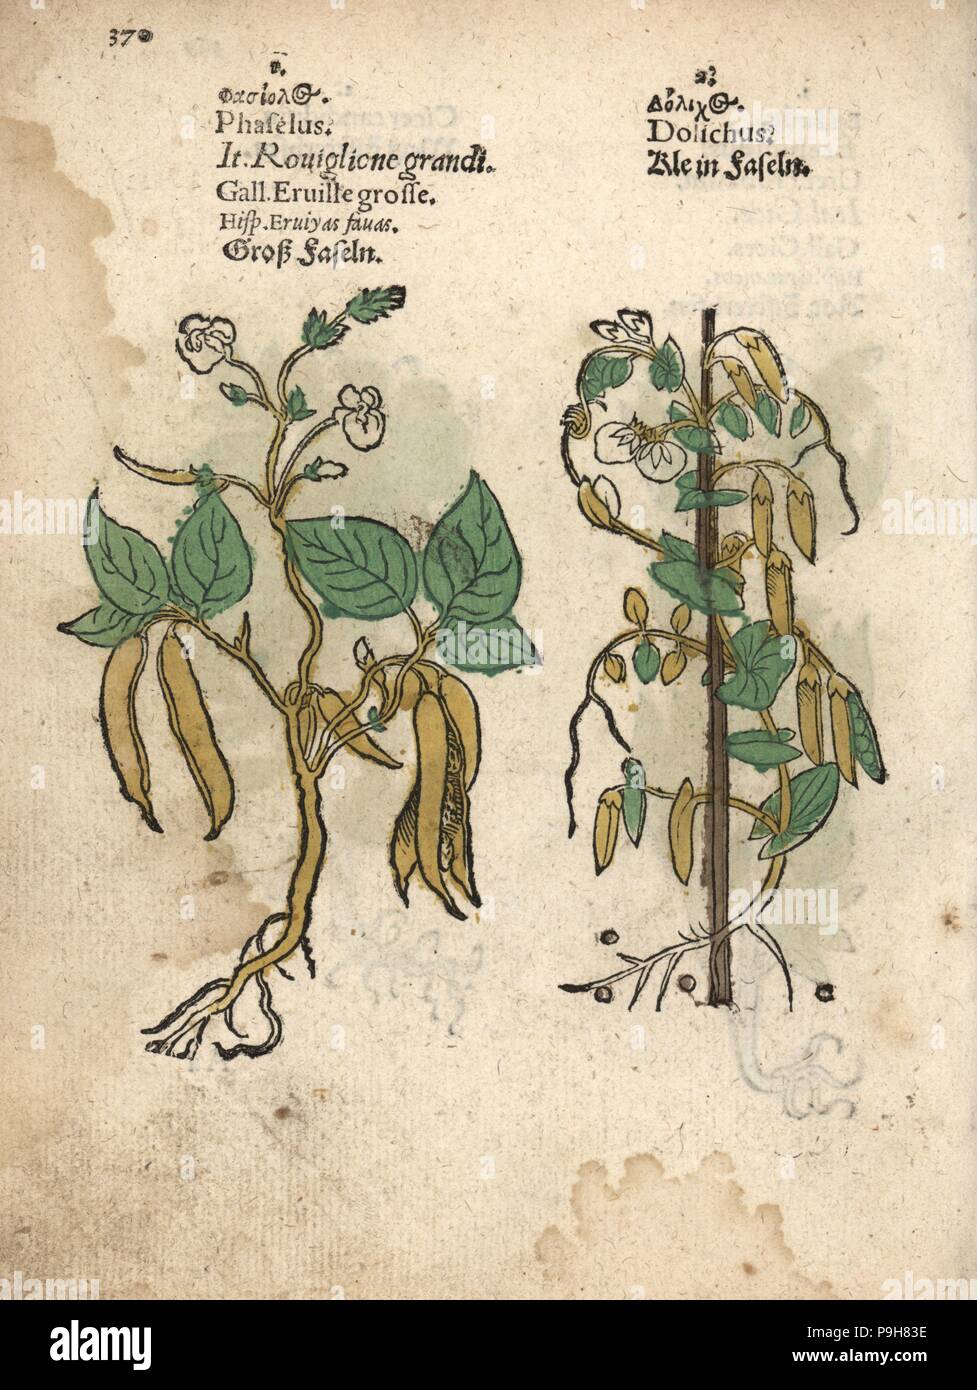 Common bean, Phaseolus vulgaris, and small bean variety, Dolichos species. Handcoloured woodblock engraving of a botanical illustration from Adam Lonicer's Krauterbuch, or Herbal, Frankfurt, 1557. This from a 17th century pirate edition or atlas of illustrations only, with captions in Latin, Greek, French, Italian, German, and in English manuscript. Stock Photo